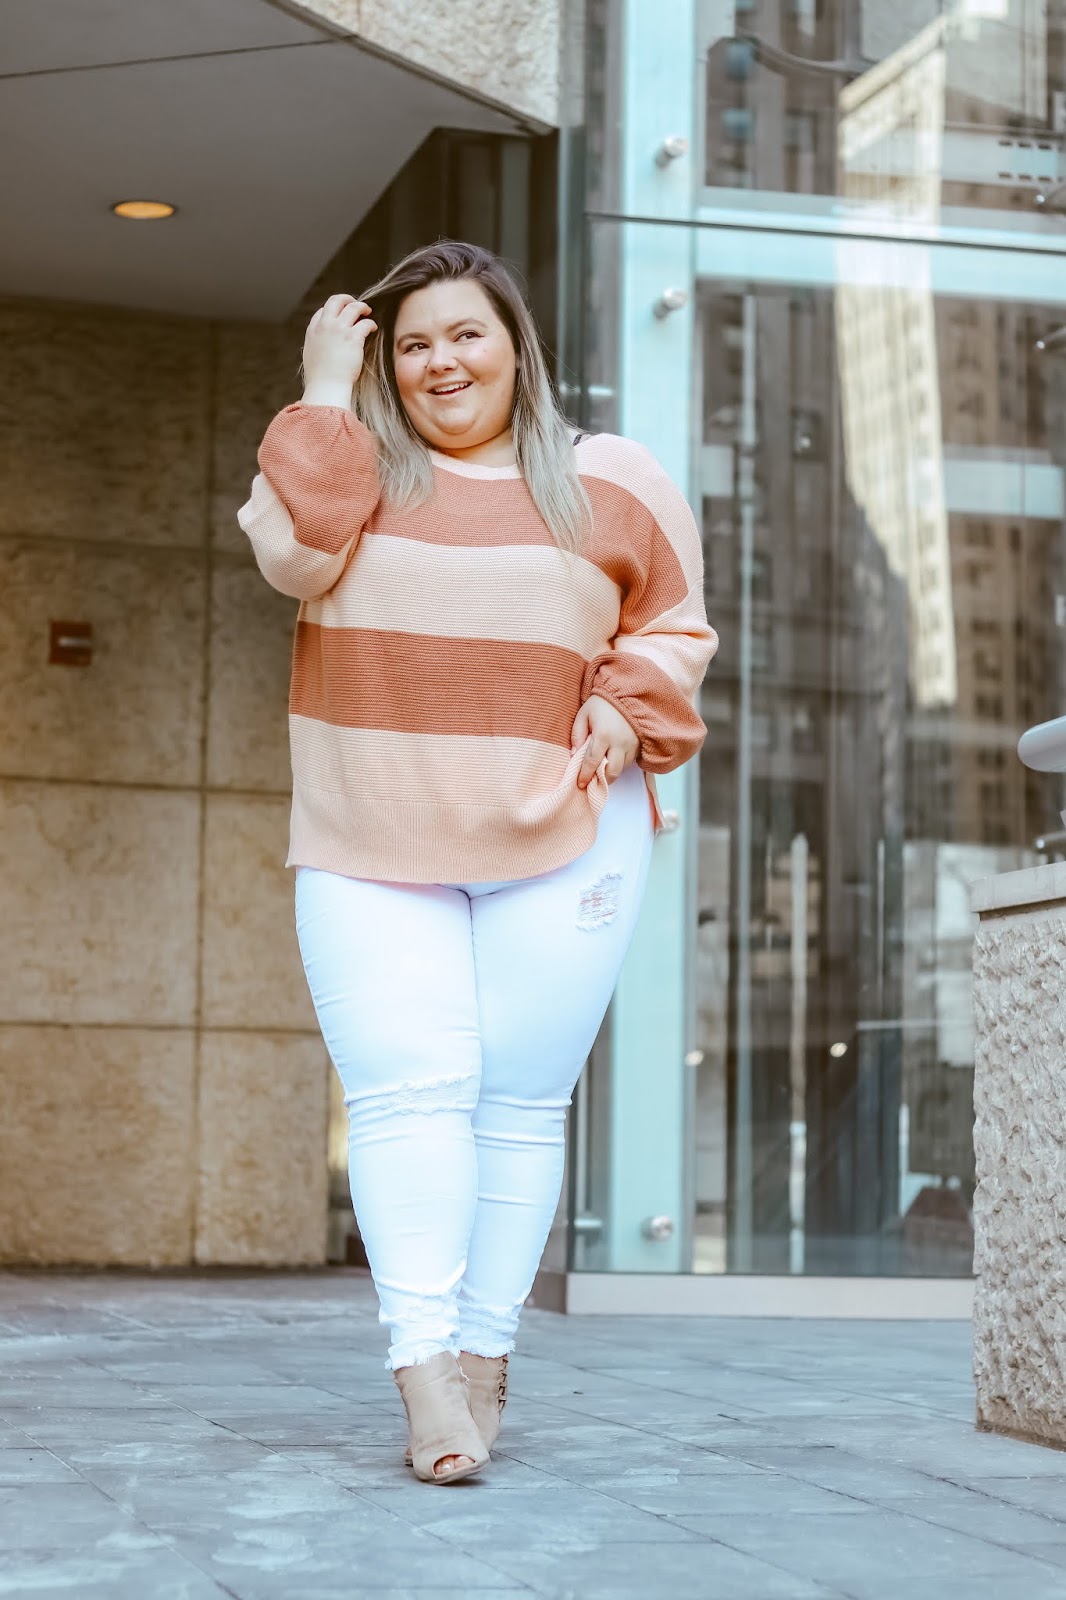 Chicago Plus Size Petite Fashion Blogger, influencer, YouTuber, and model Natalie Craig, of Natalie in the City, reviews Chic Soul's white skinny jeans and a striped sweater.